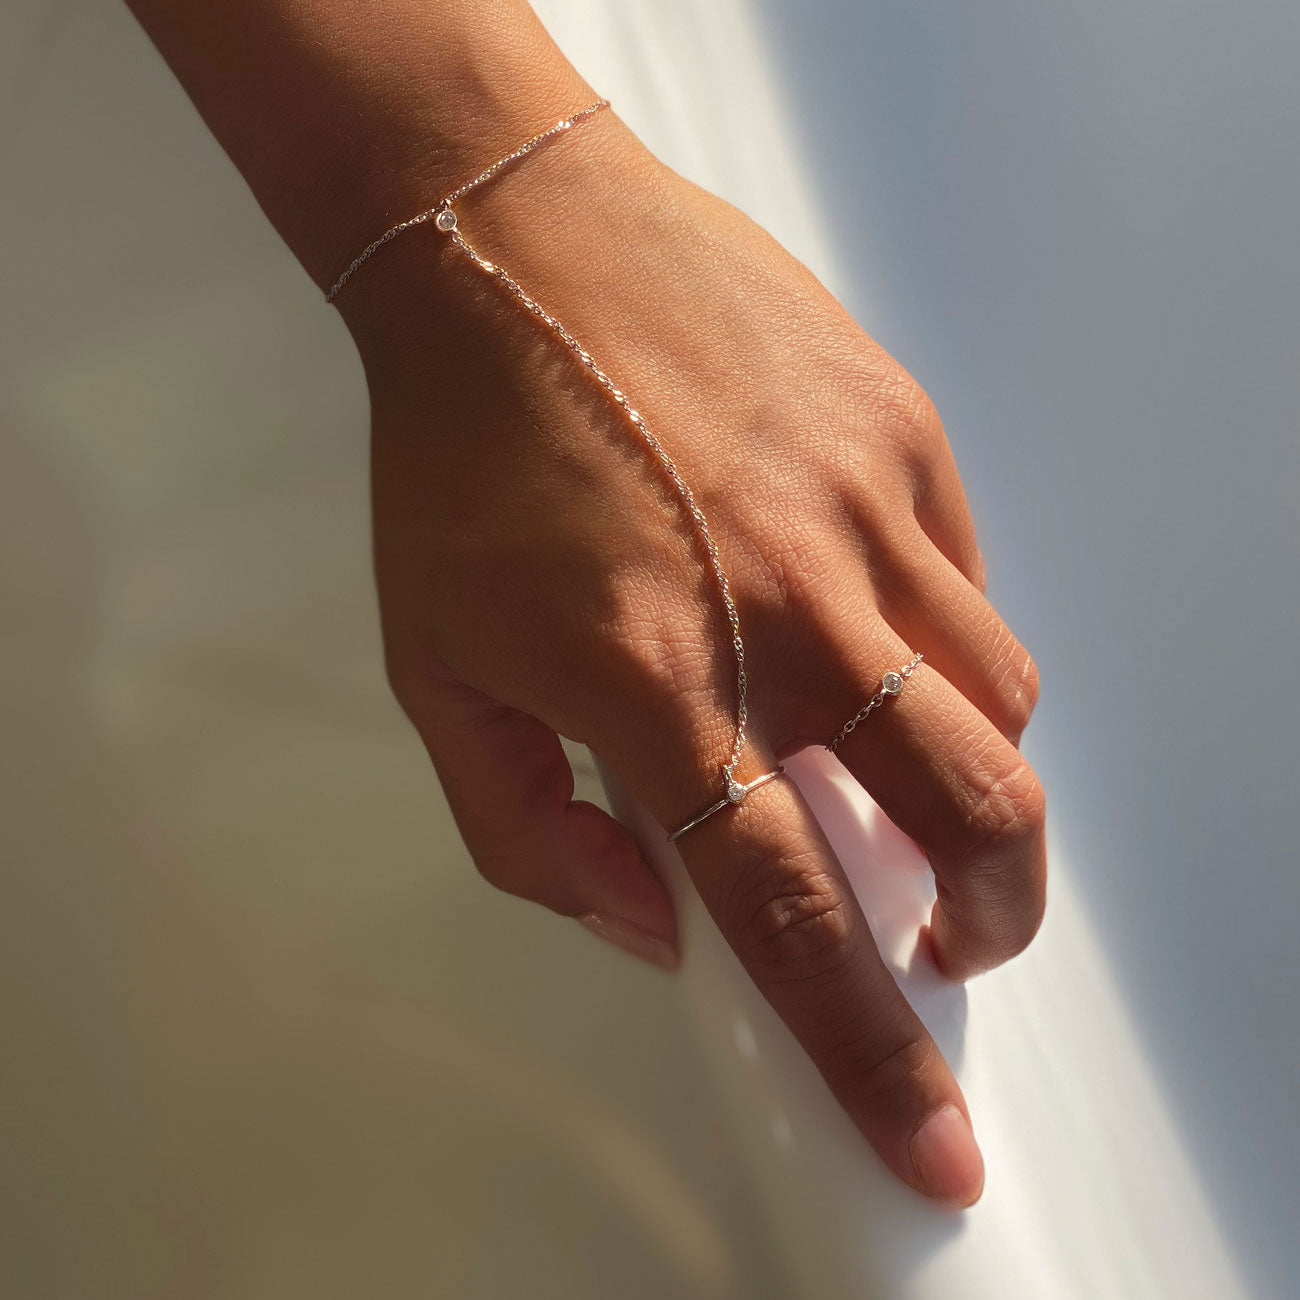 Hand wearing Sterling Silver Minimal Ring Handchain paired with Solitaire Chain Ring